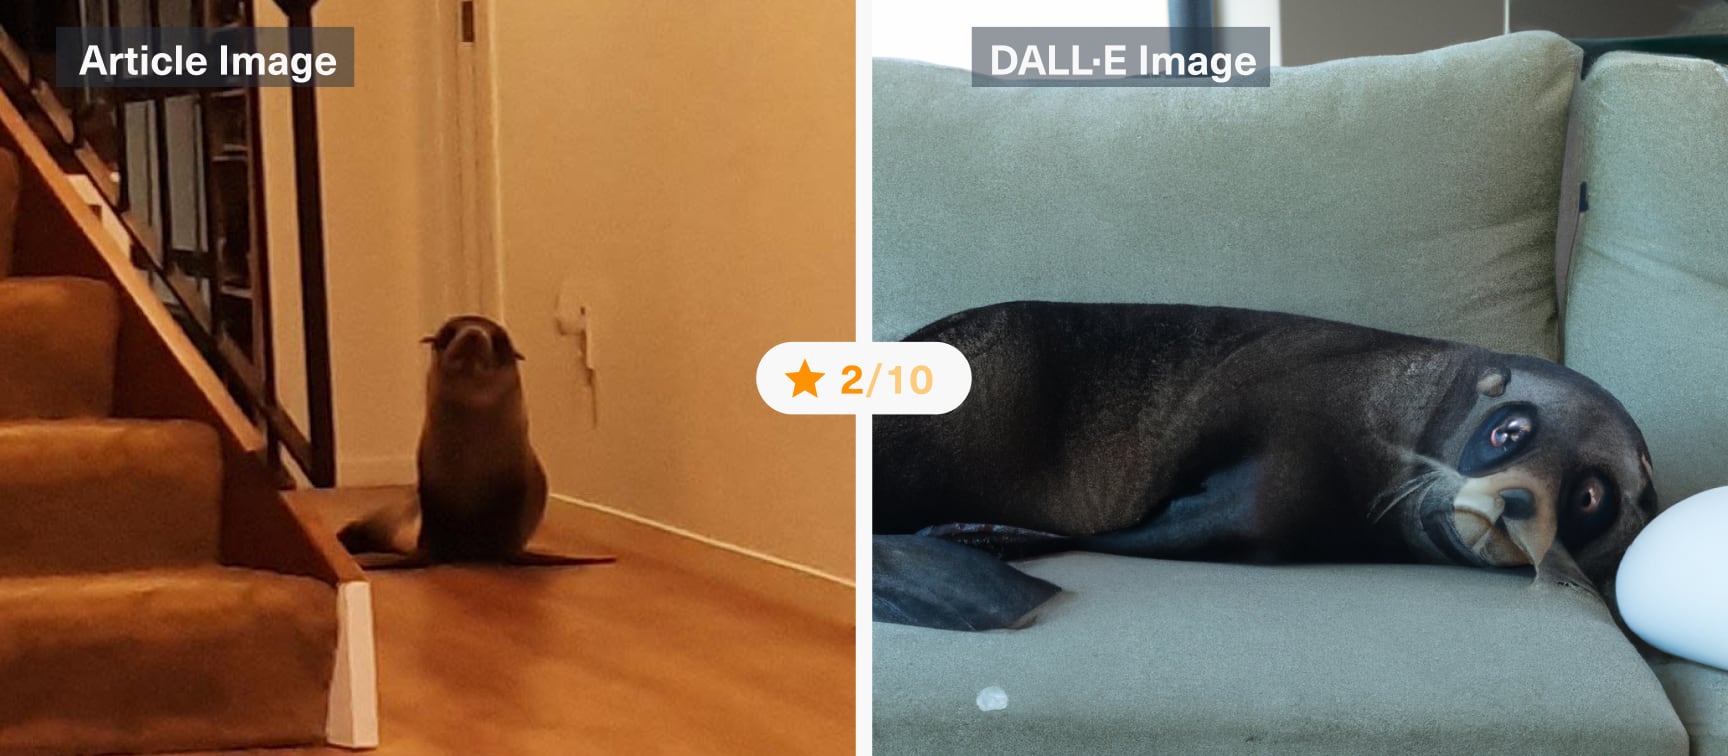 DALL-E meets News API:“Seal breaks into New Zealand home, traumatises cat and hangs out on couch”